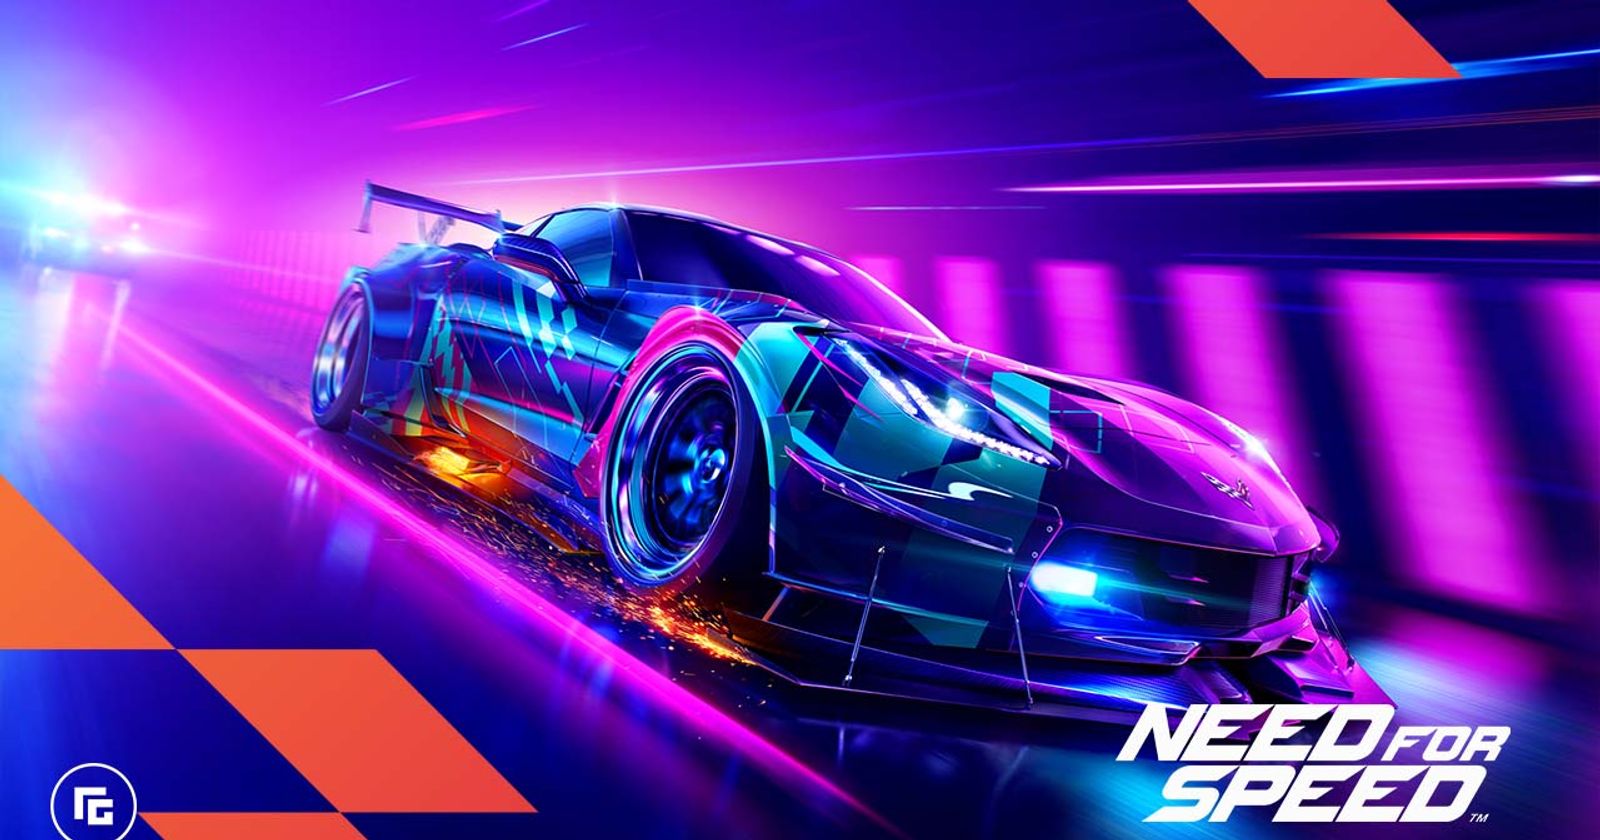 Need for Speed 2022 is reportedly the first truly 'next-gen